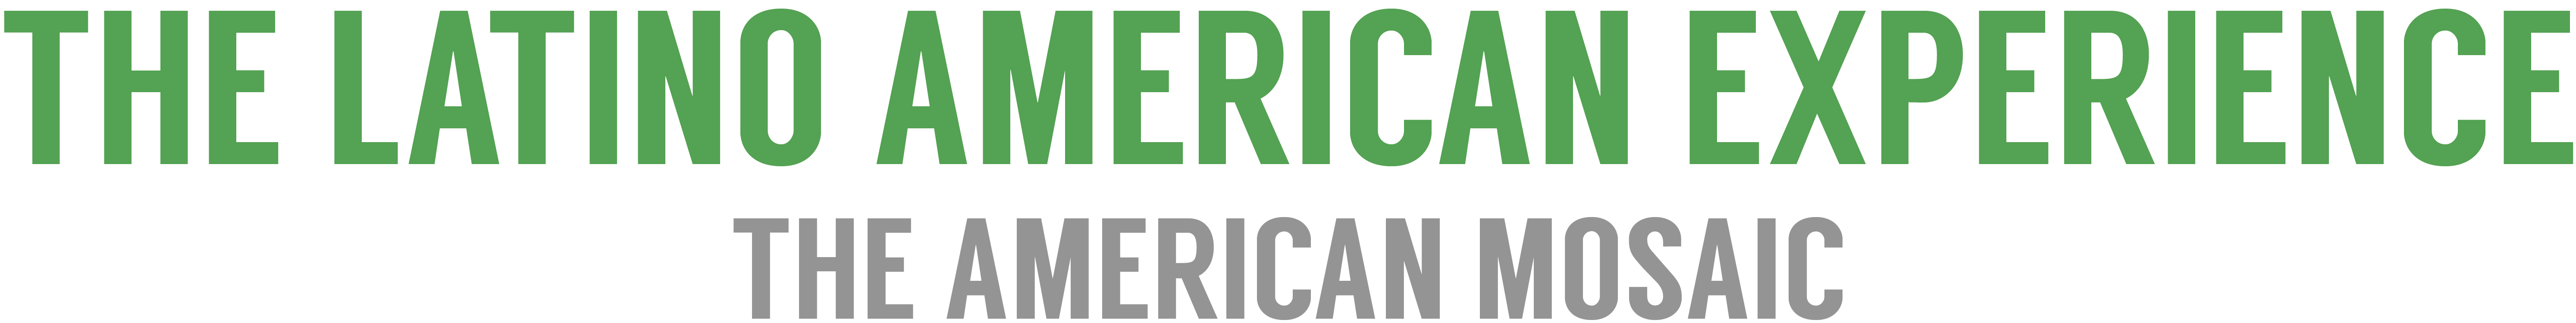 ABC-CLIO Solutions - The American Mosaic: The Latino American Experience